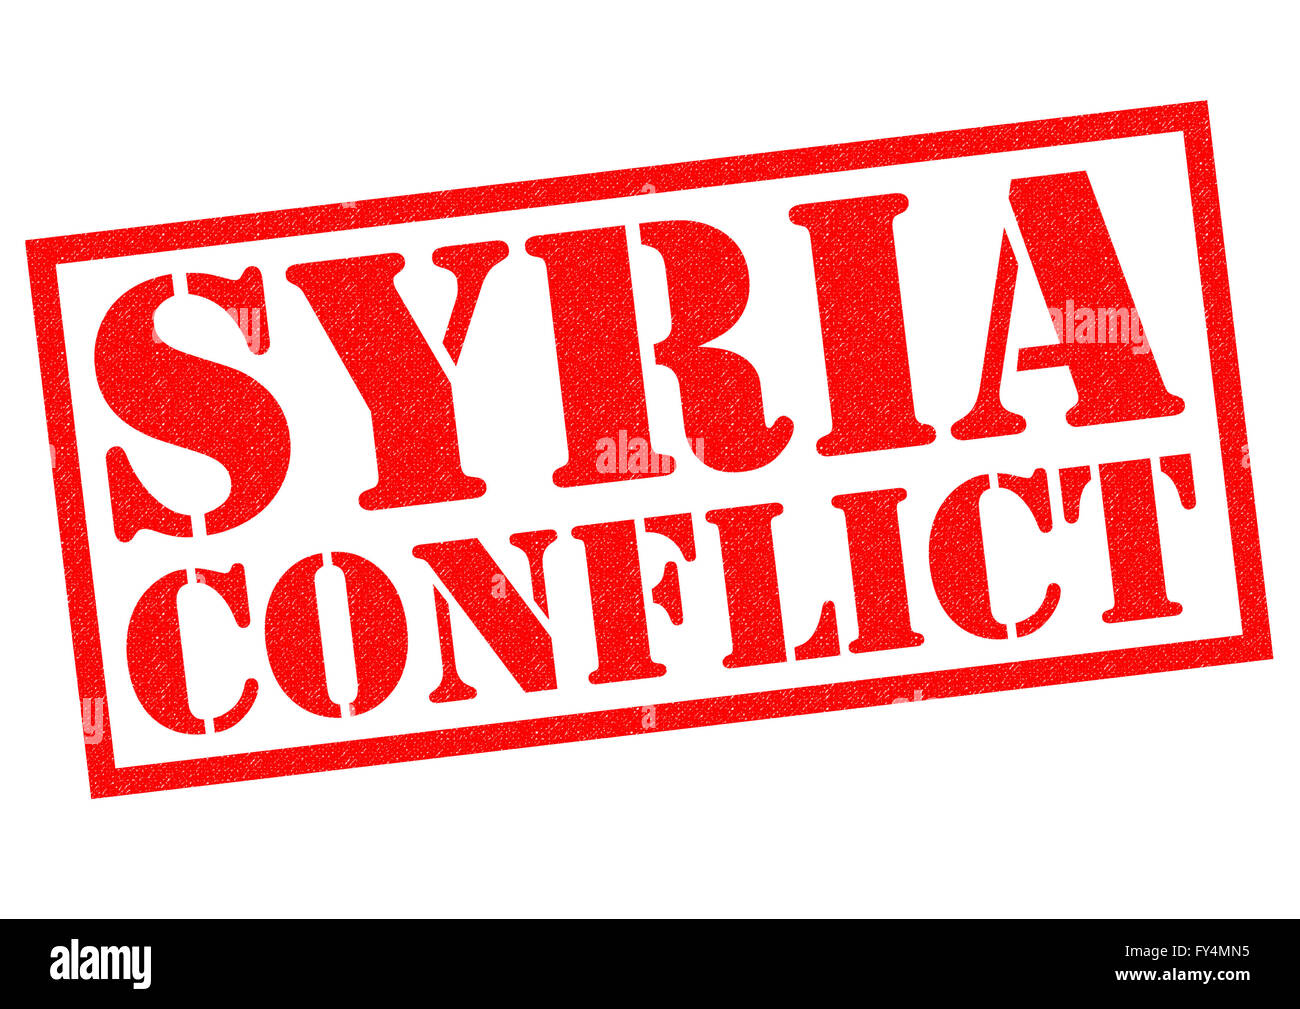 SYRIA CONFLICT red Rubber Stamp over a white background. Stock Photo